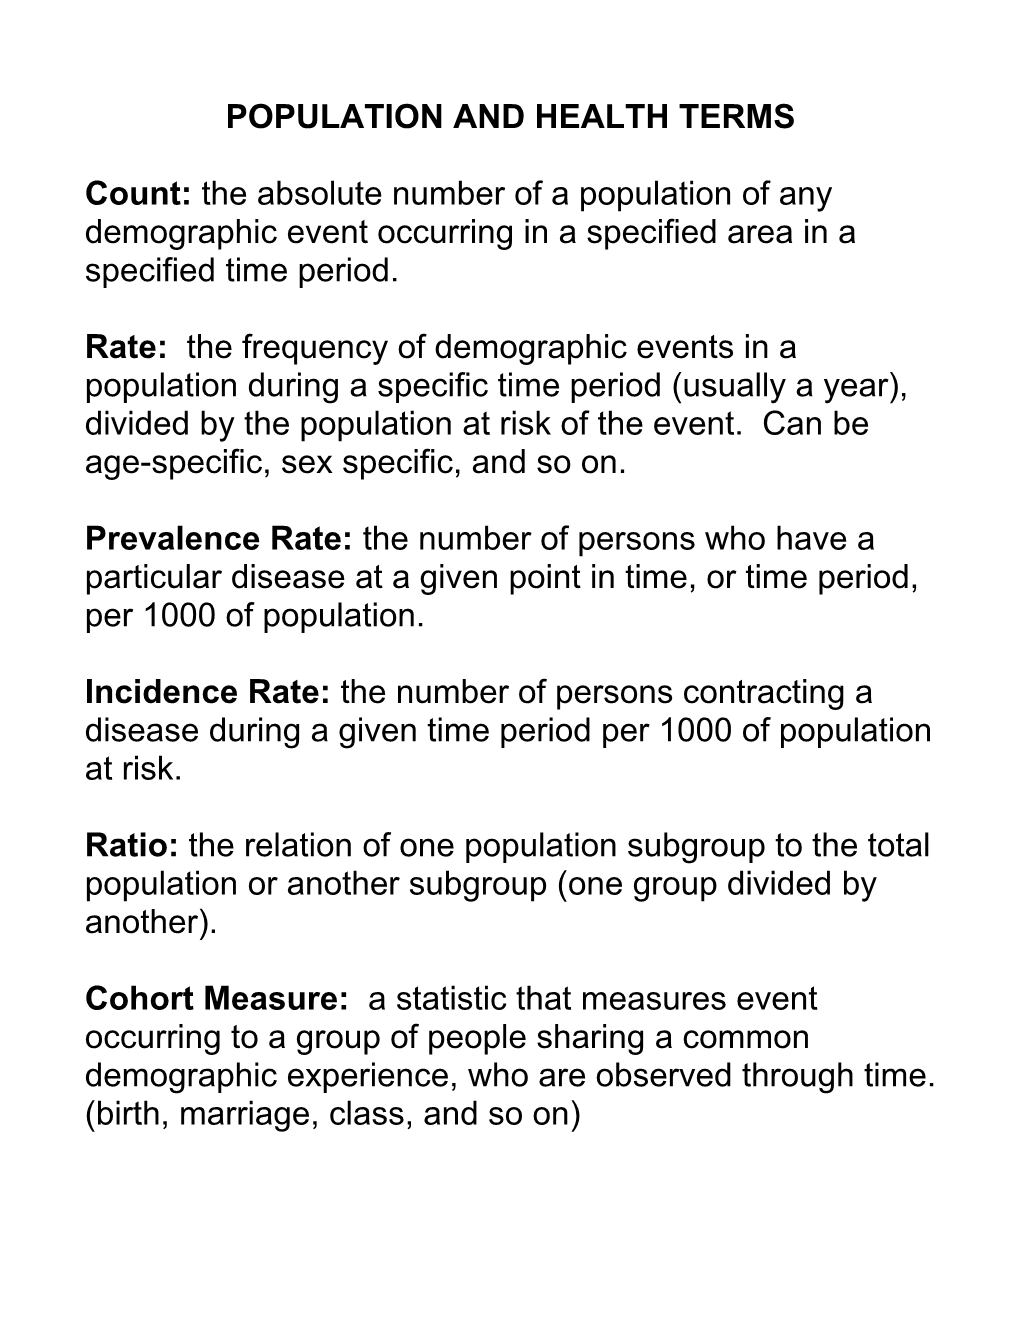 Key Demographic Terms and Concepts